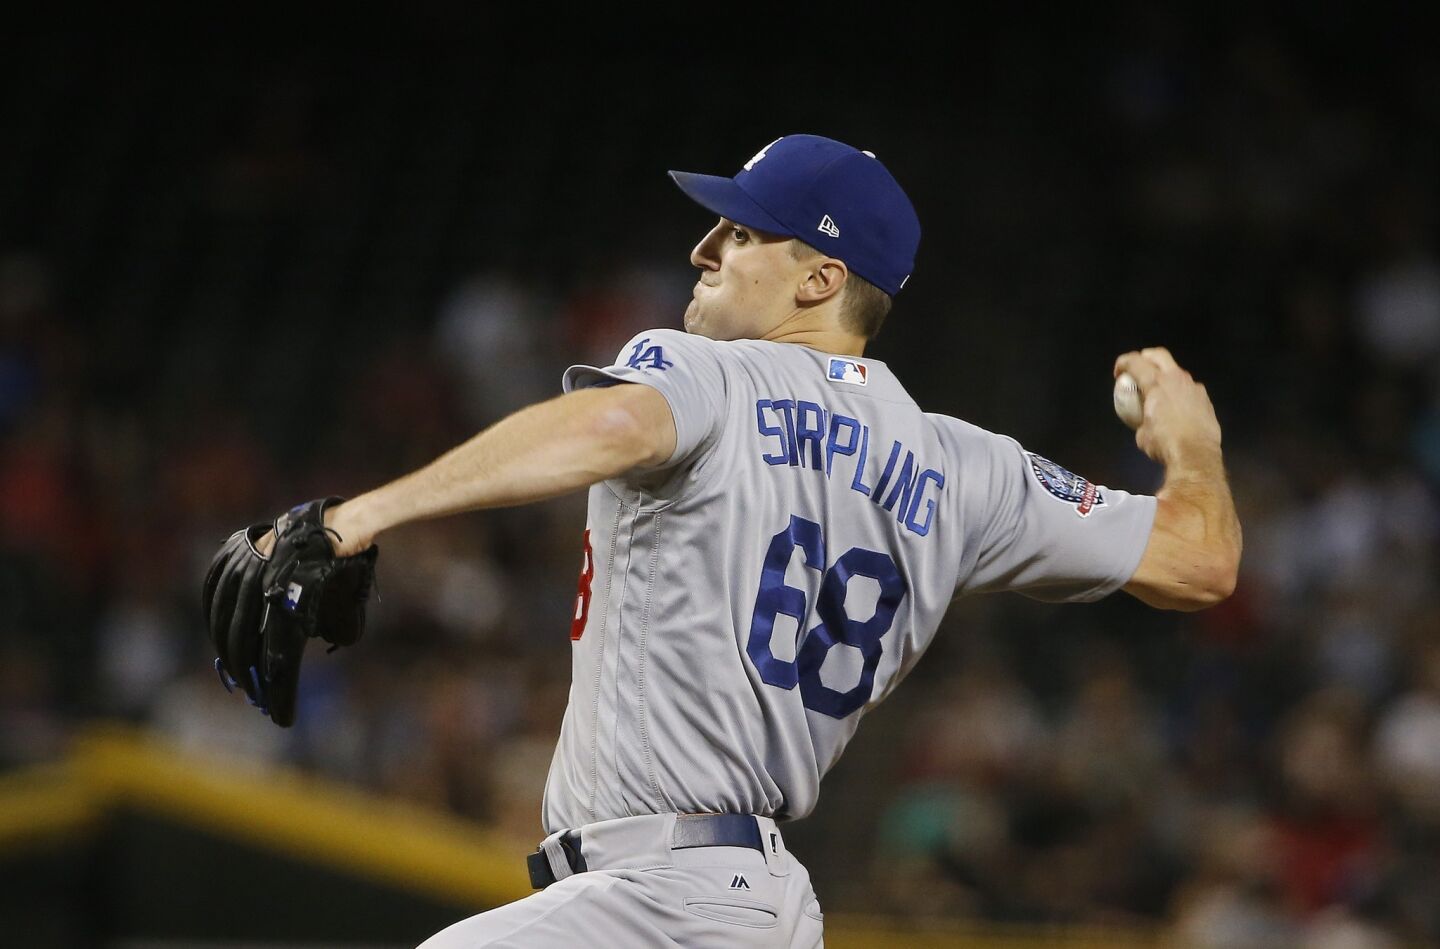 Los Angeles Dodgers starter Ross Stripling throws a pitch against the Arizona Diamondbacks during the first inning of a baseball game Wednesday, Sept. 26, 2018, in Phoenix. (AP Photo/Ross D. Franklin)